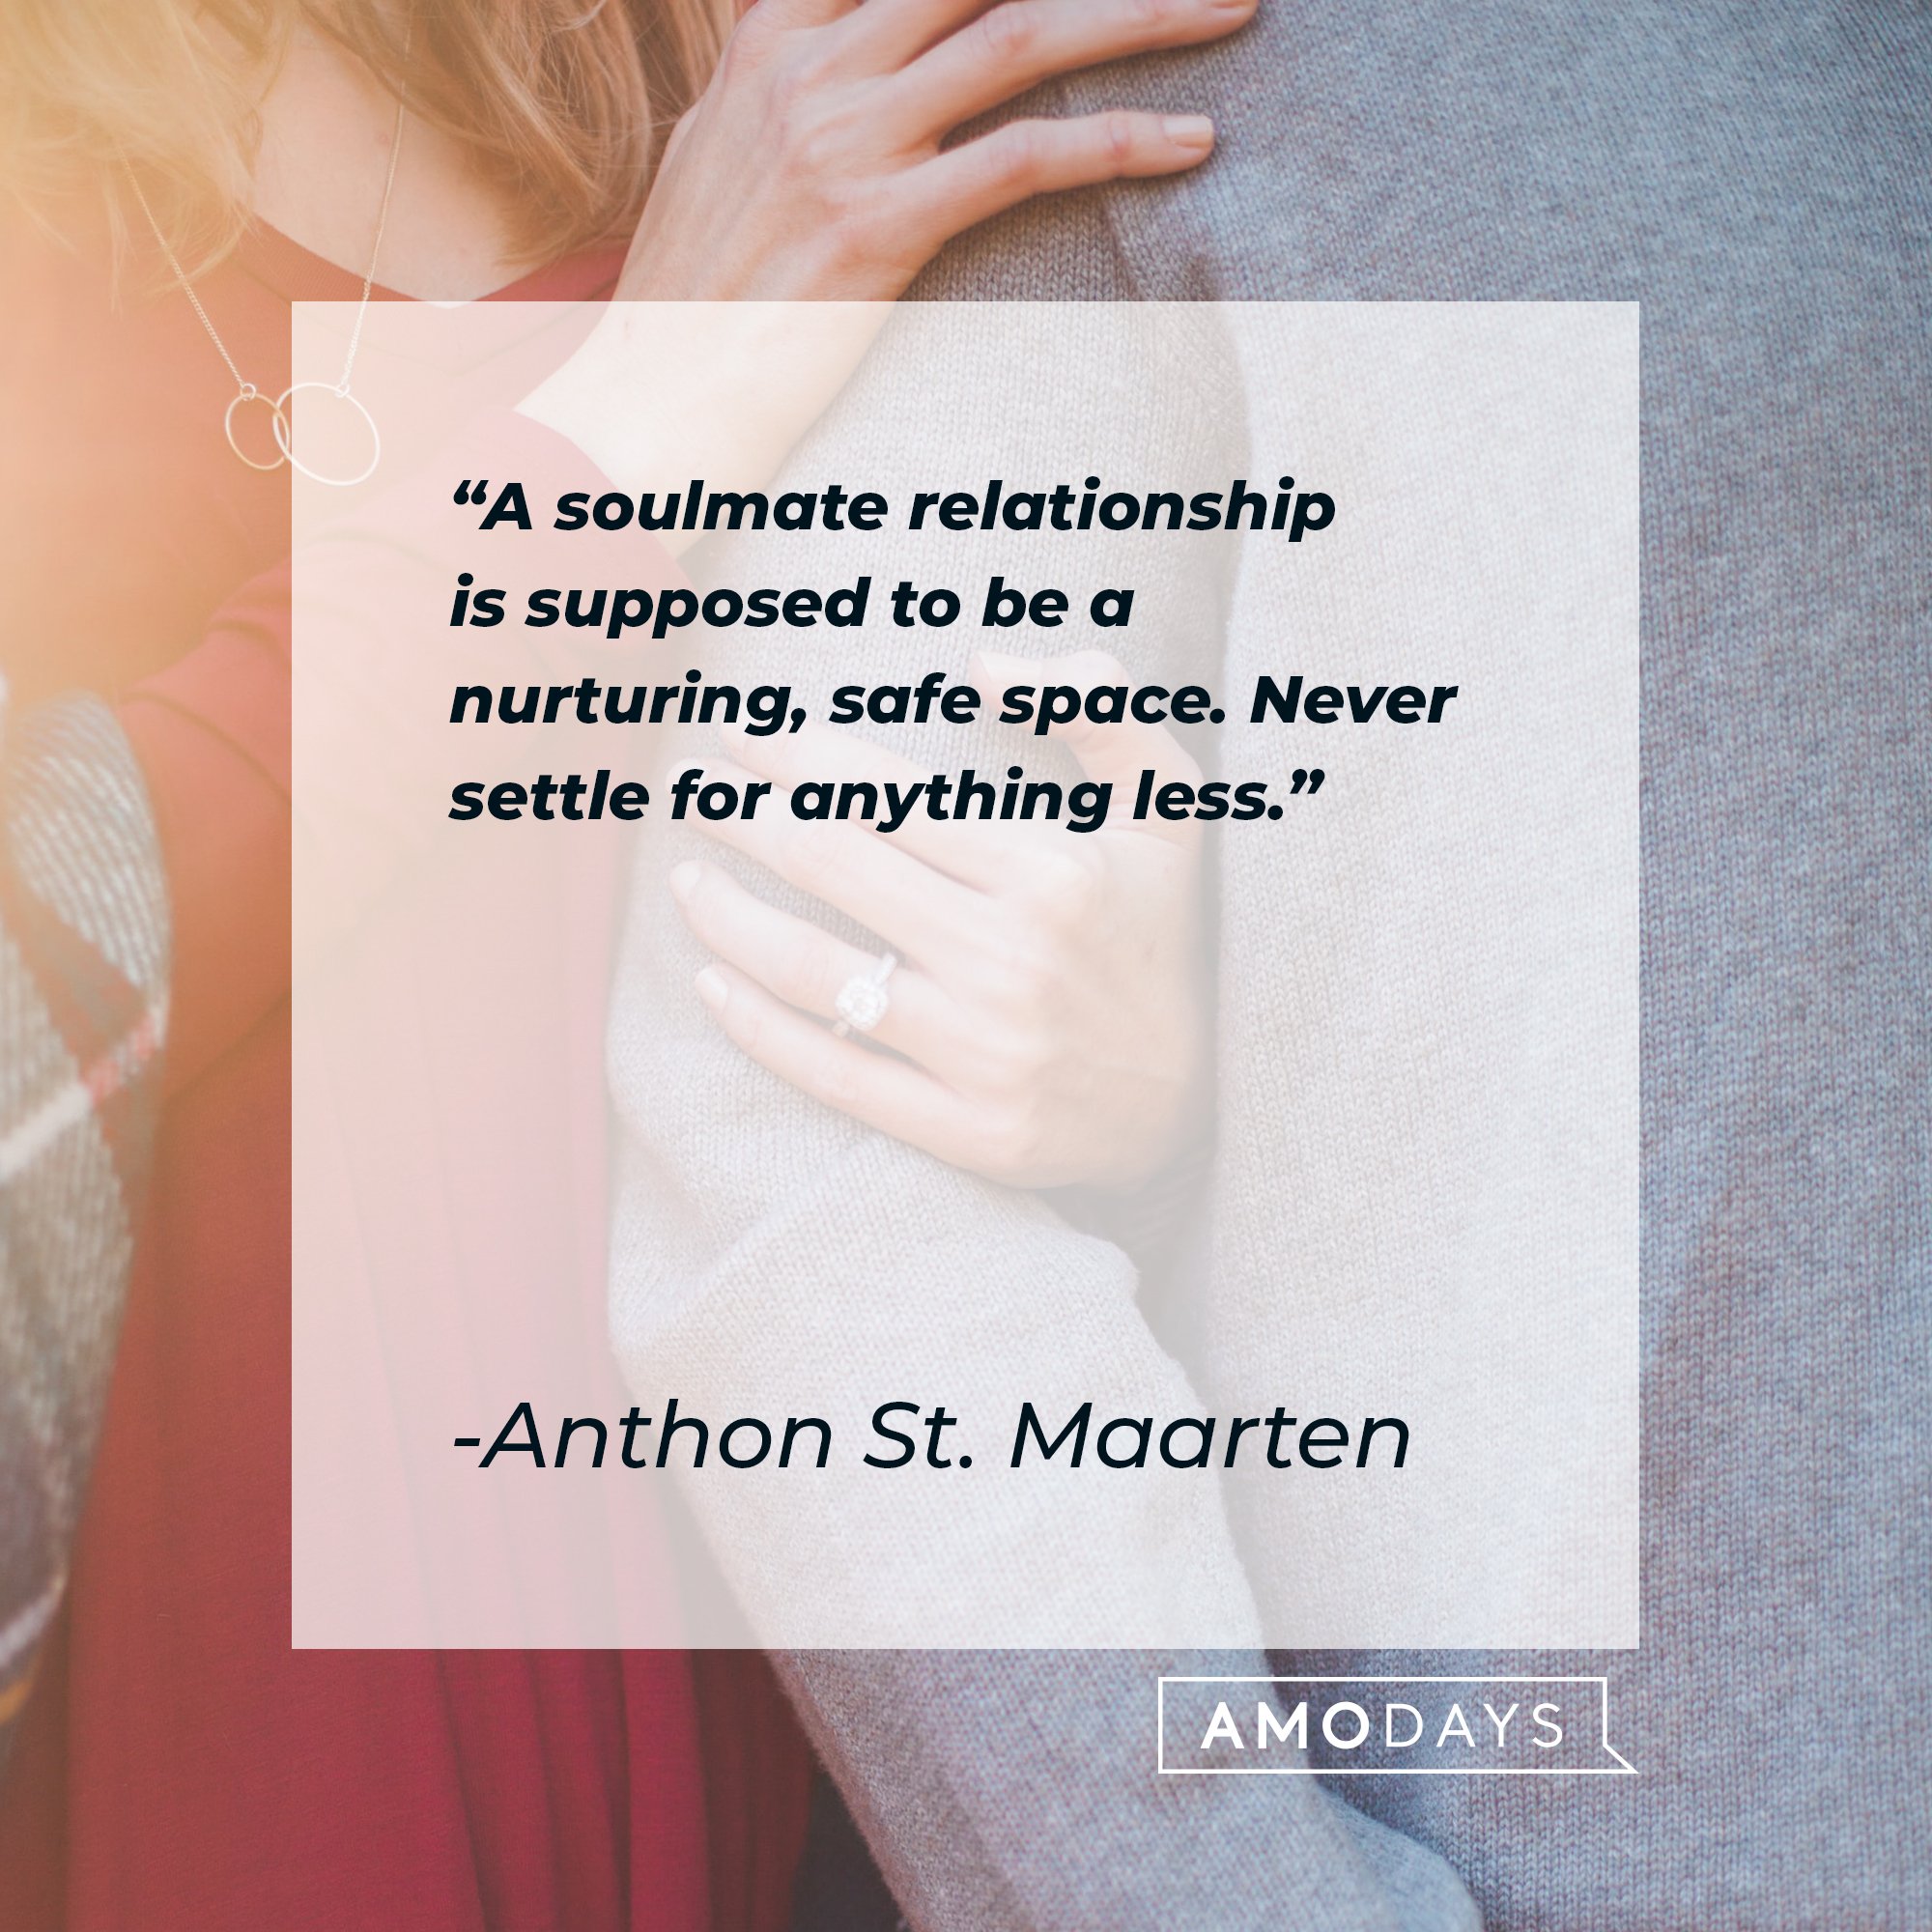 Anthon St. Maarten’s quote: "A soulmate relationship is supposed to be a nurturing, safe space. Never settle for anything less." | Image: AmoDays 